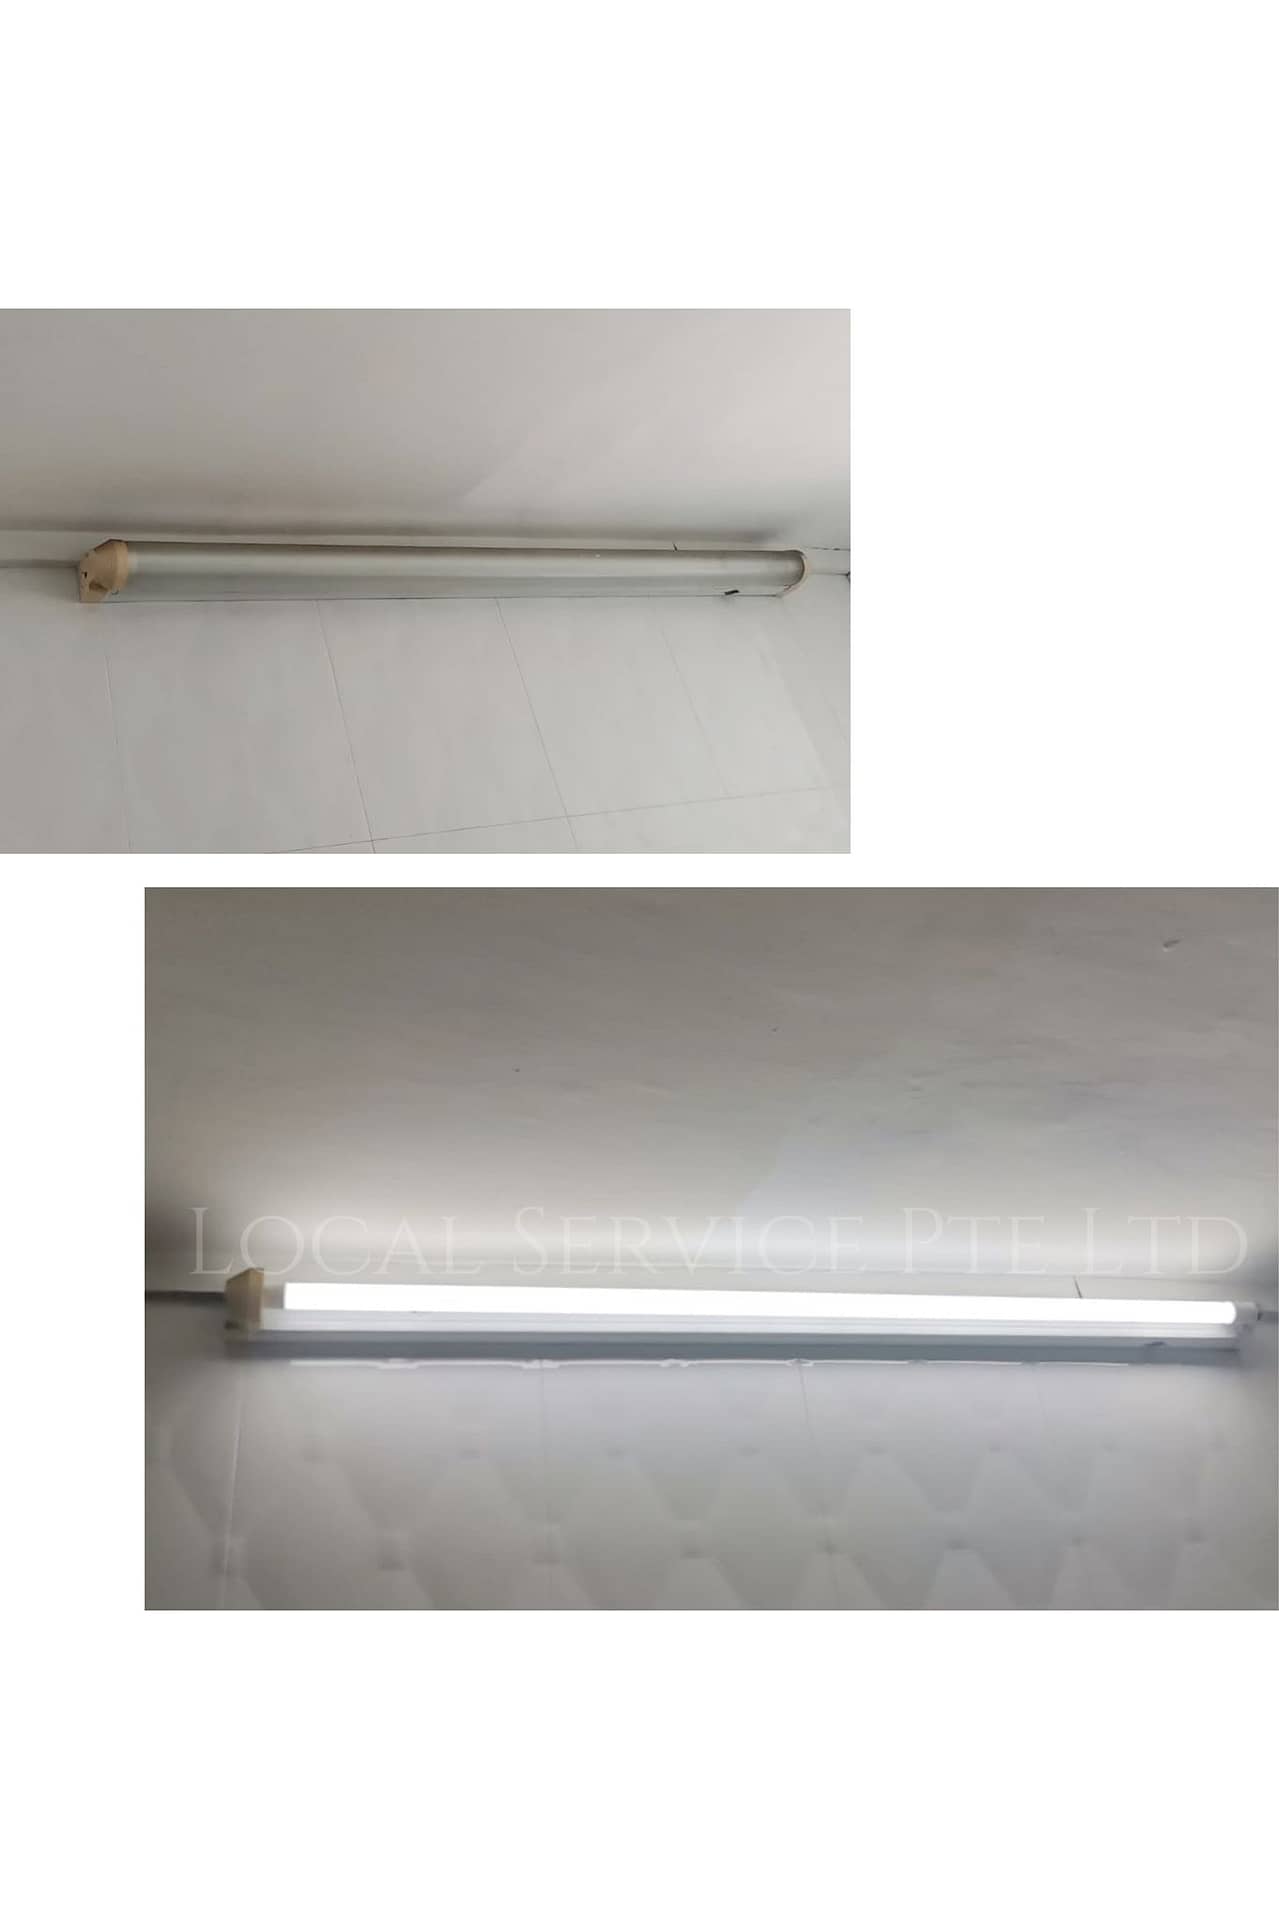 Supply And Replace T8 Led Light Tube